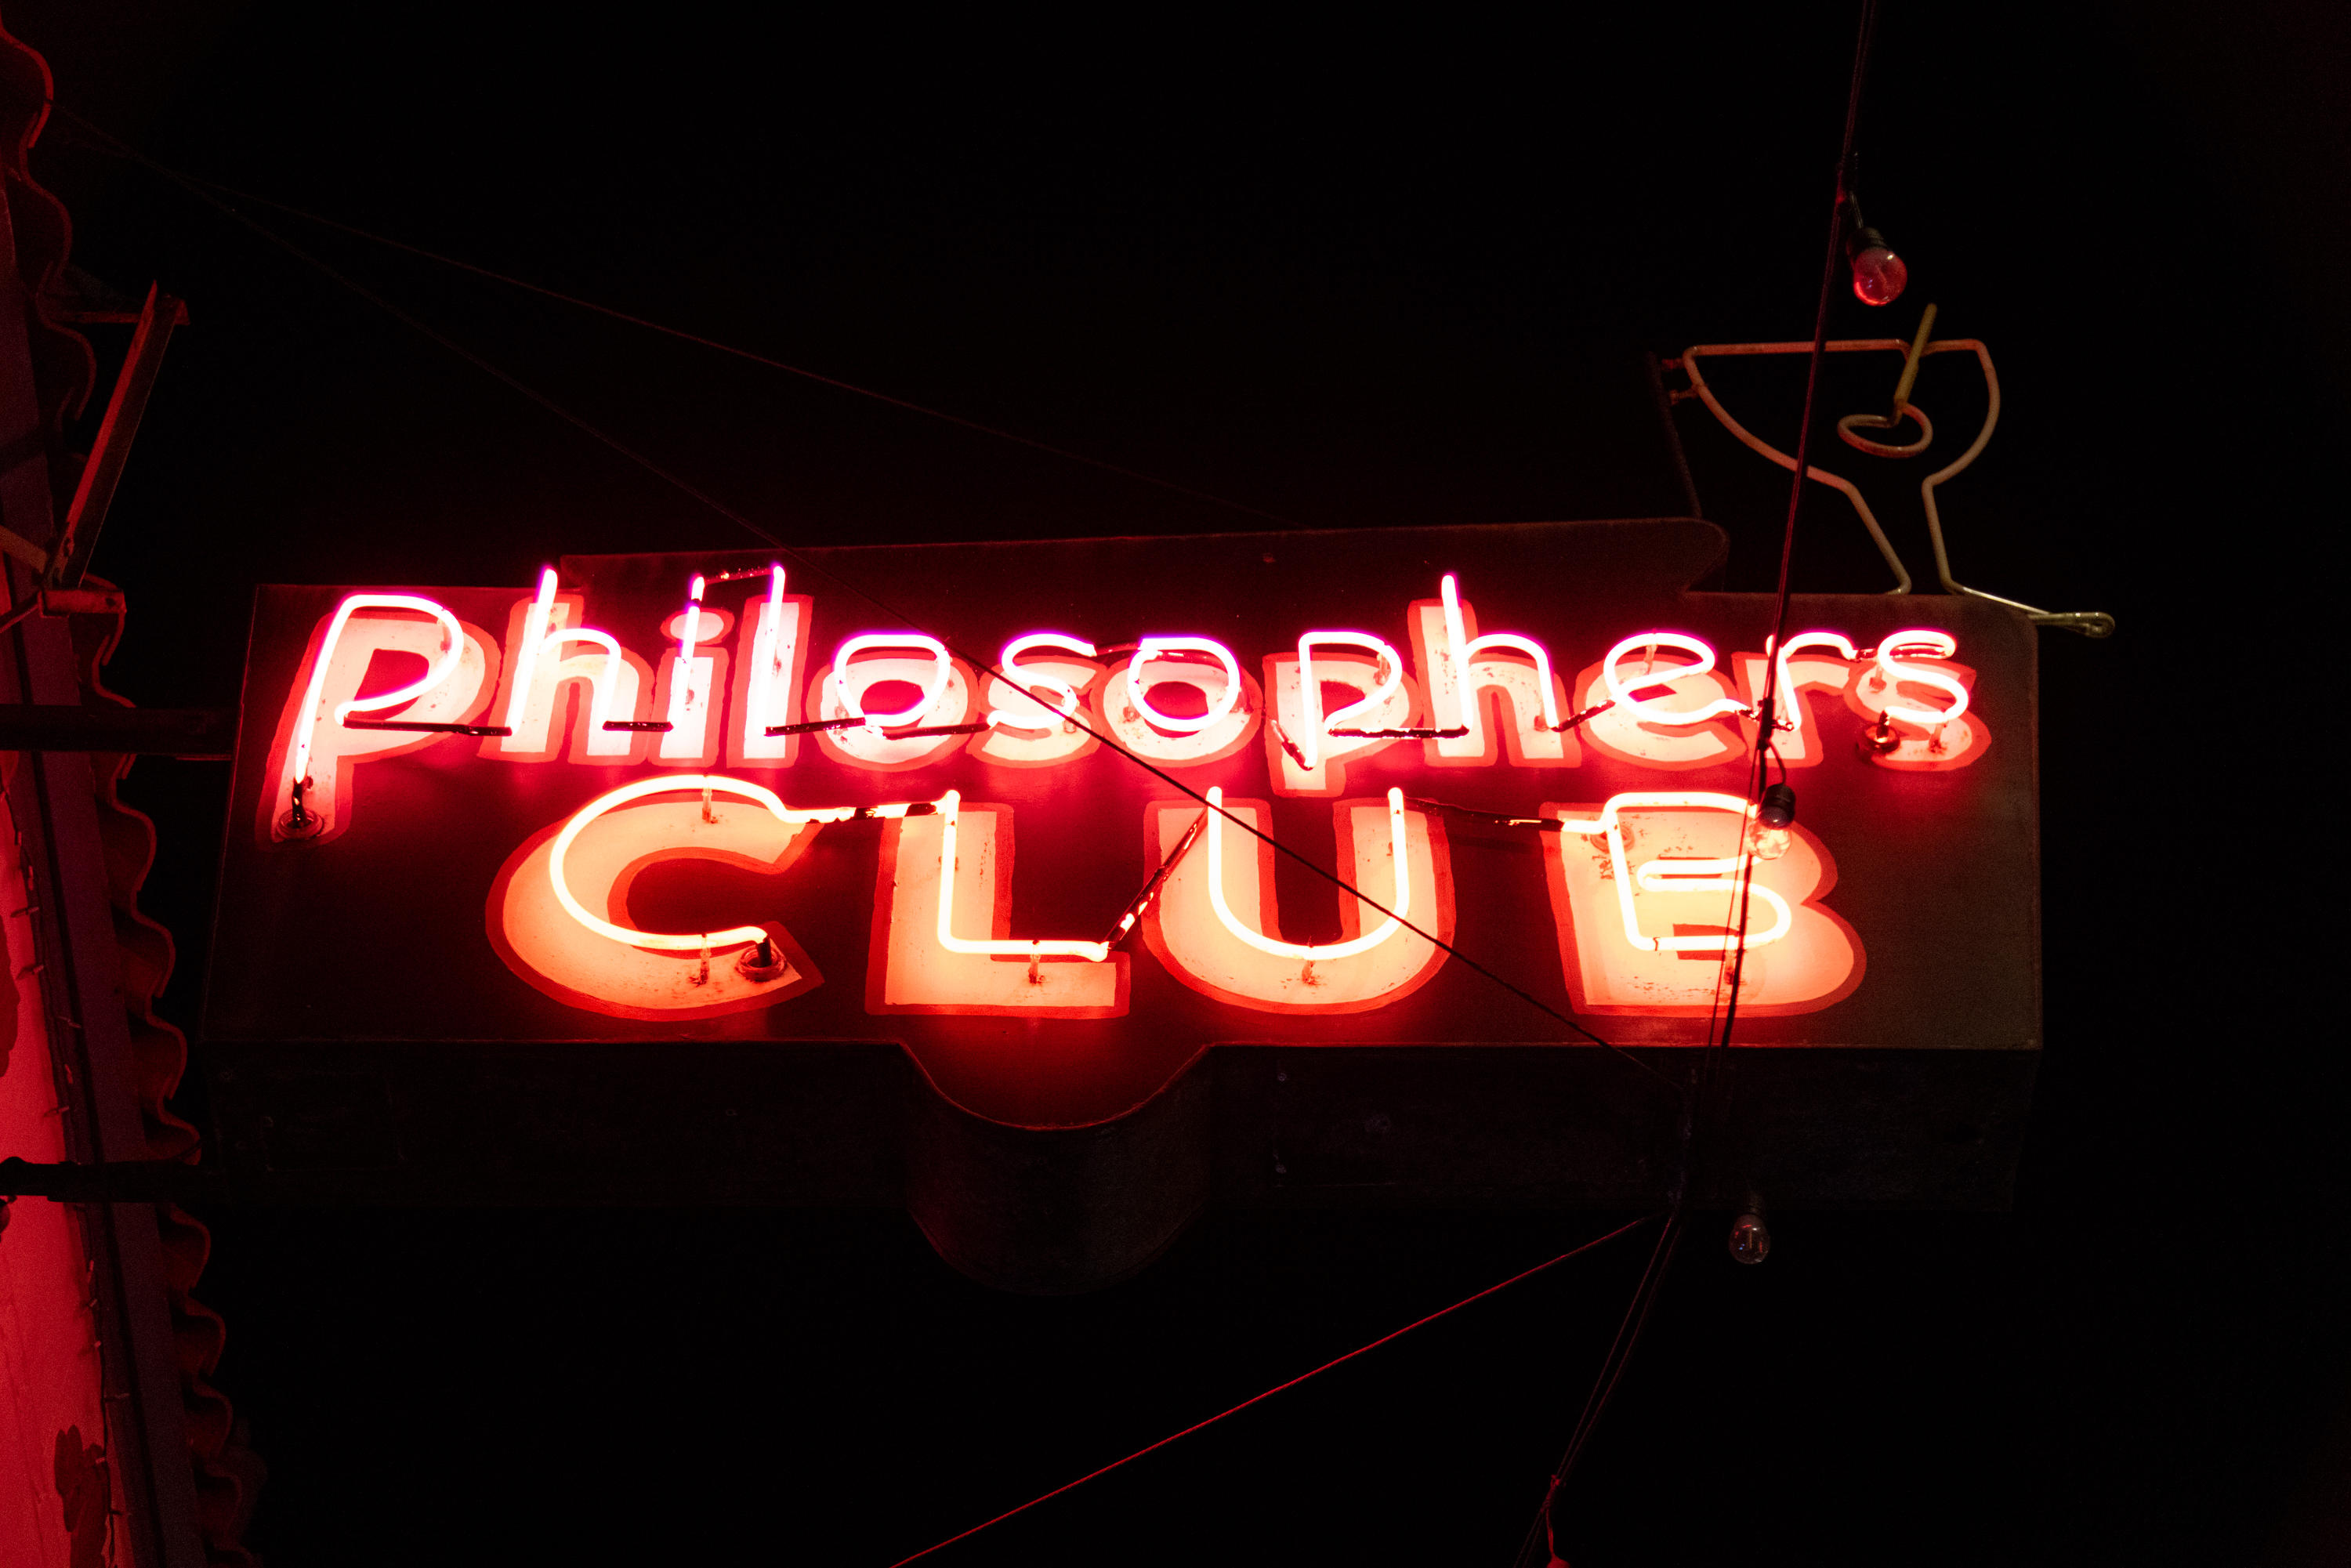 A red neon sign at night that reads &quot;Philosopher's CLUB&quot;